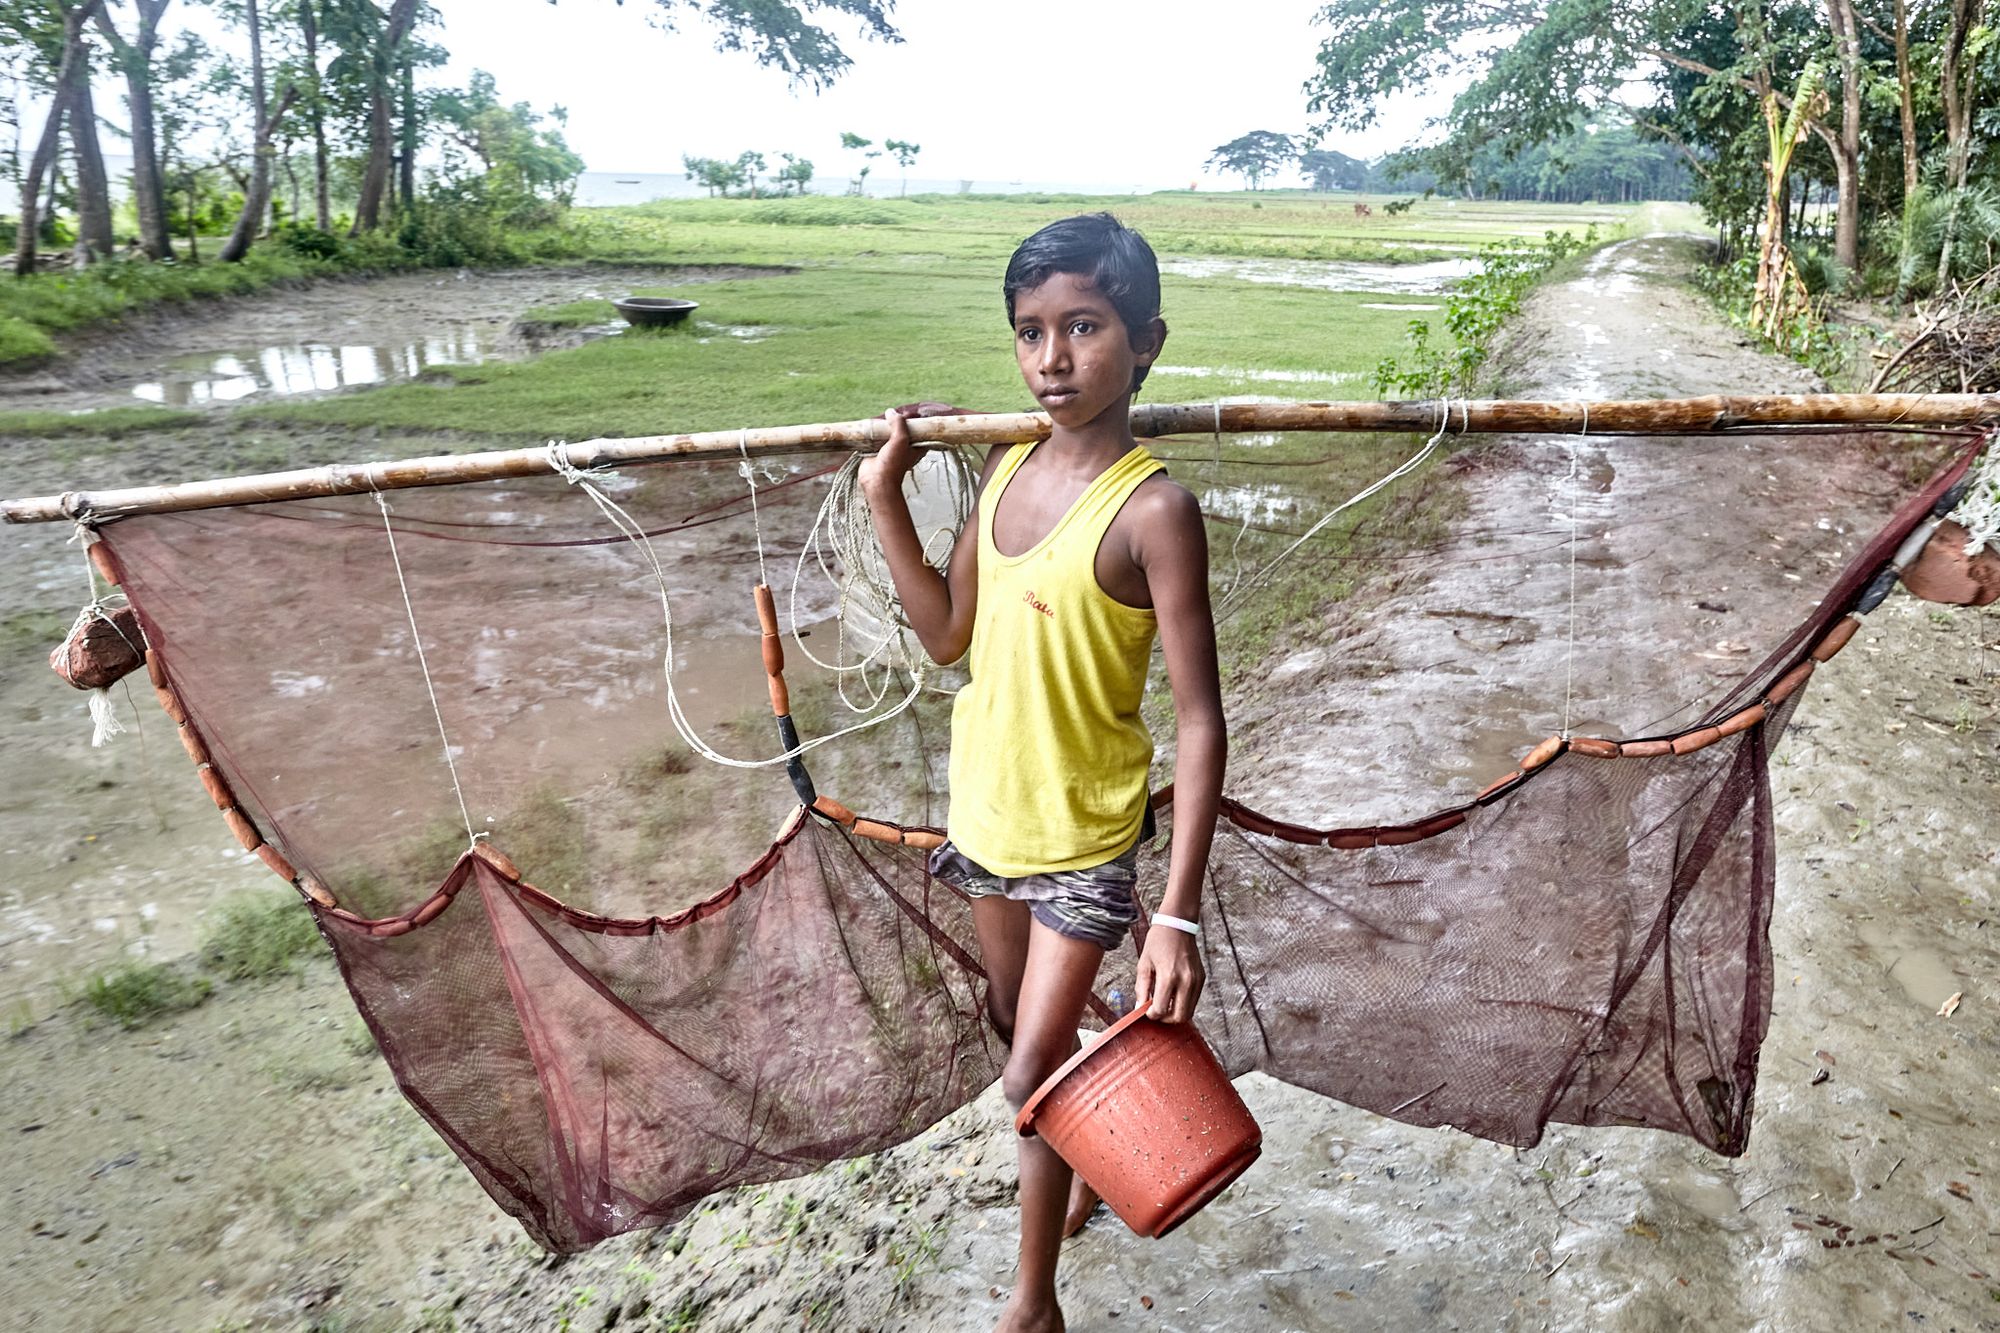 A boy is heading to fish with a net in rural Bangladesh